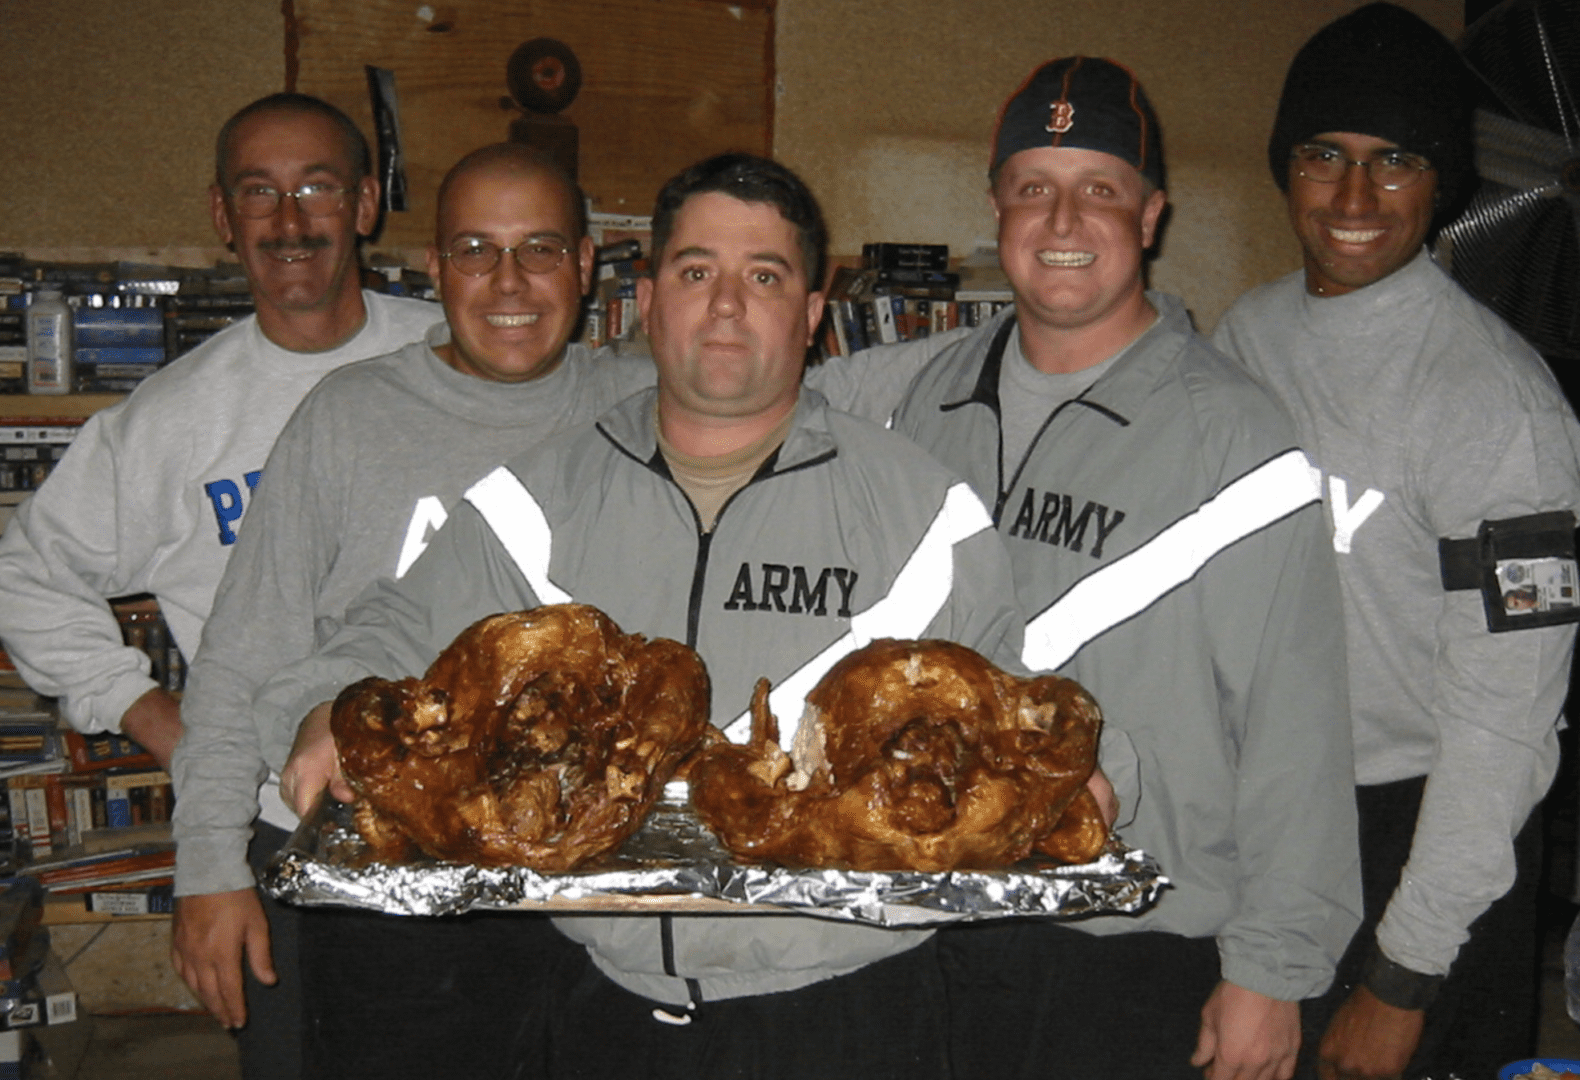 A group of veterans posing with turkeys.